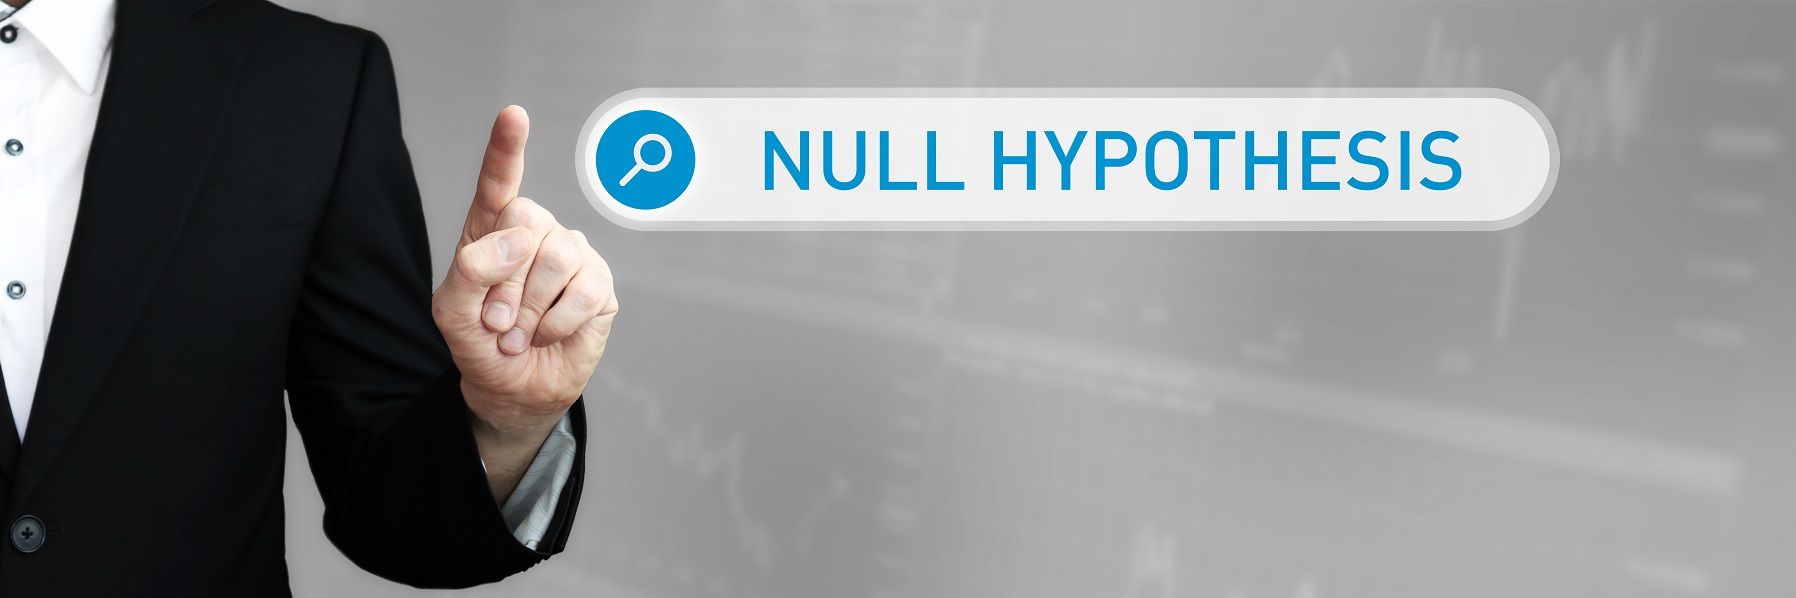 writing null hypothesis in word